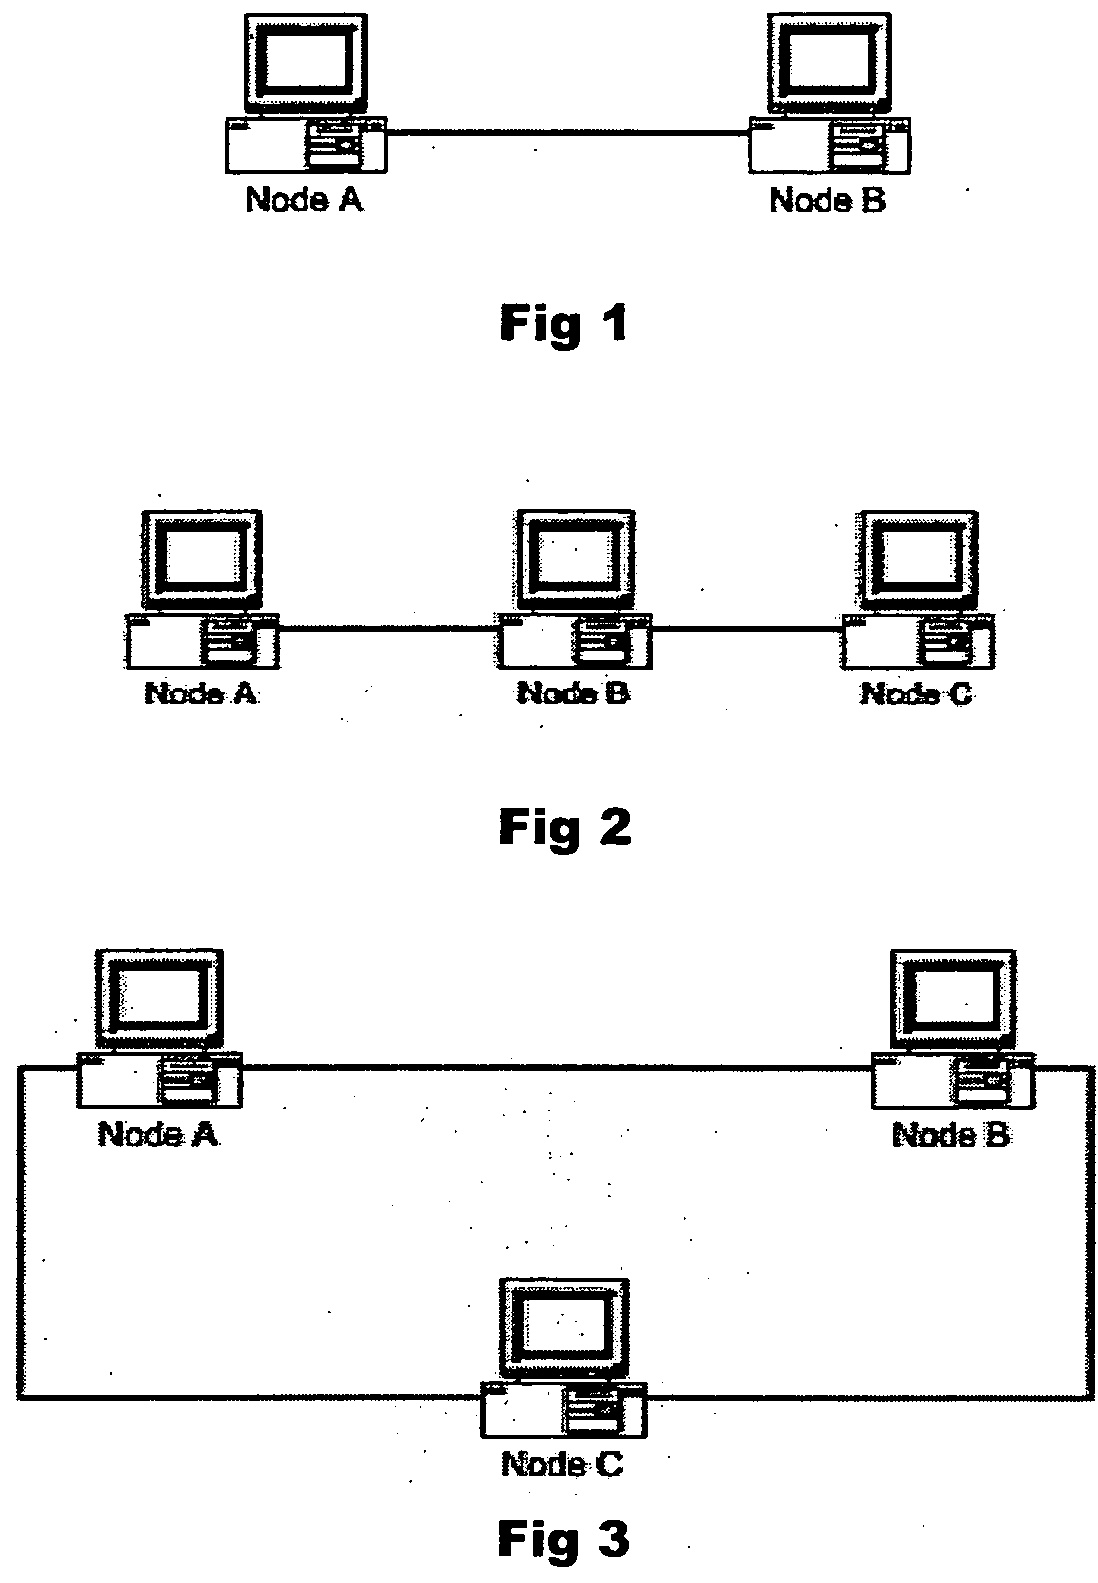 System and method for searching for specific types of people or information on a Peer-to-Peer network